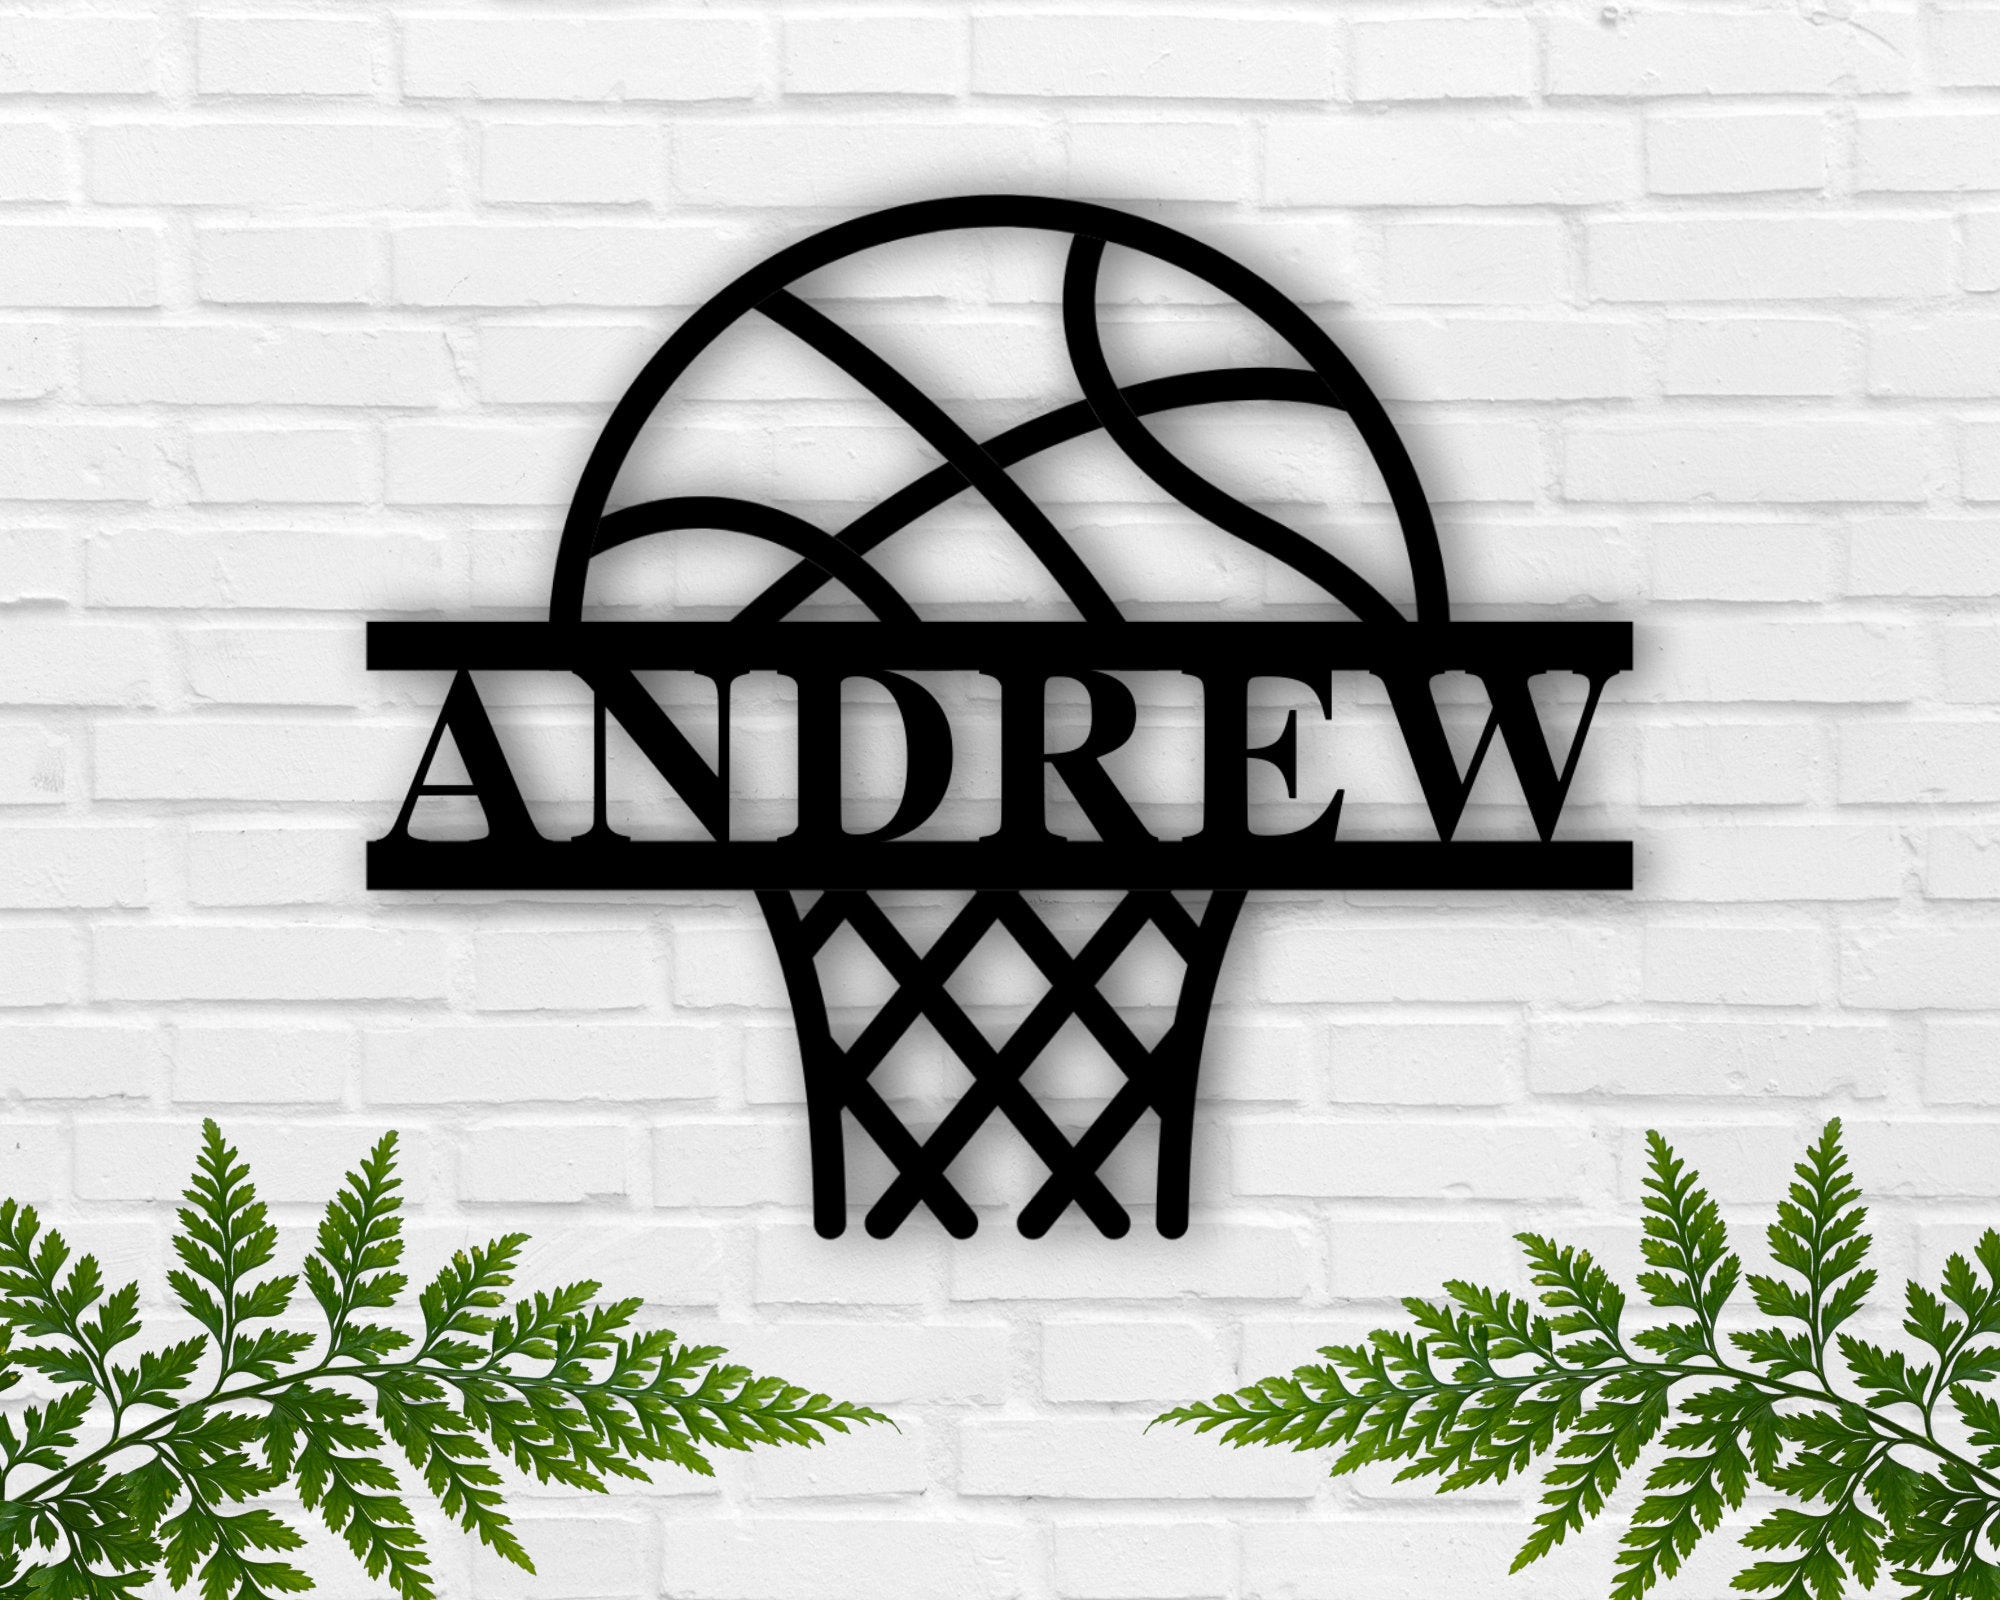 Personalized Basketball Name Sign, Custom Metal Basketball With Hoop, Sports Fan, Kids Room Wall Art, Kids Christmas Gift, Kids Birthday Laser Cut Metal Signs Custom Gift Ideas 12x12IN